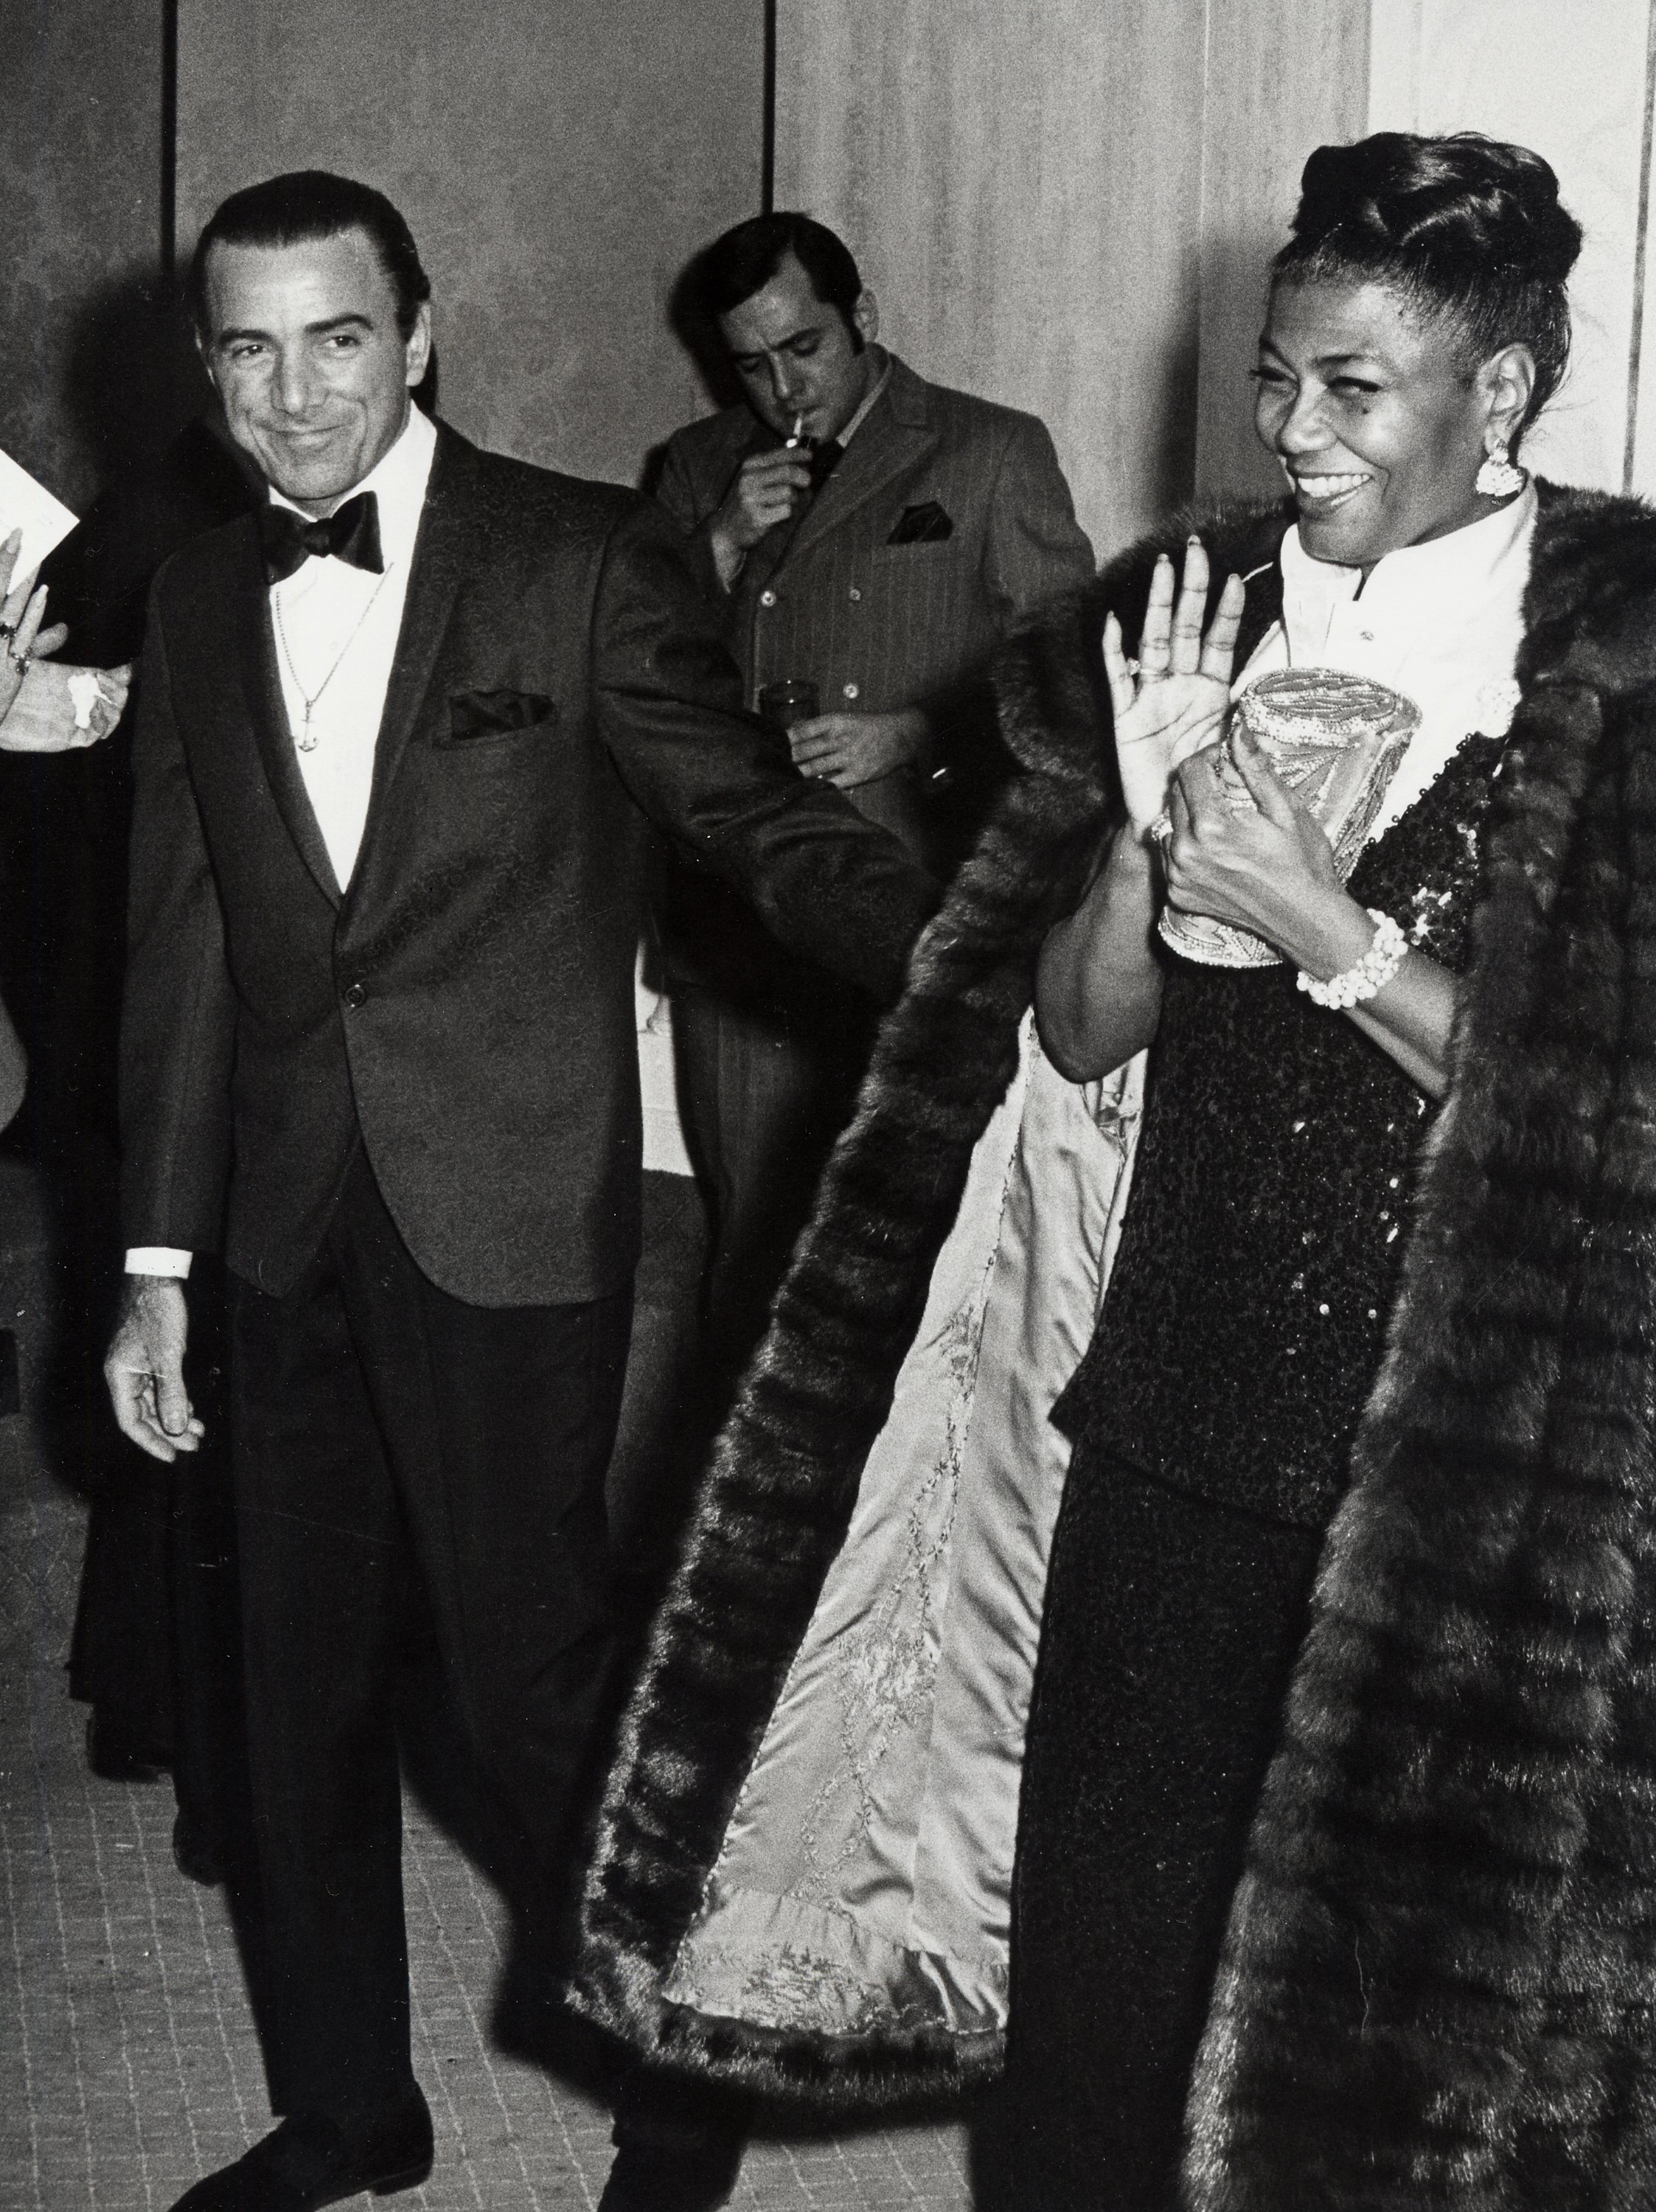 Louie Bellson and Pearl Bailey at the Cue Awards on January 3, 1969 | Photo: Getty Images